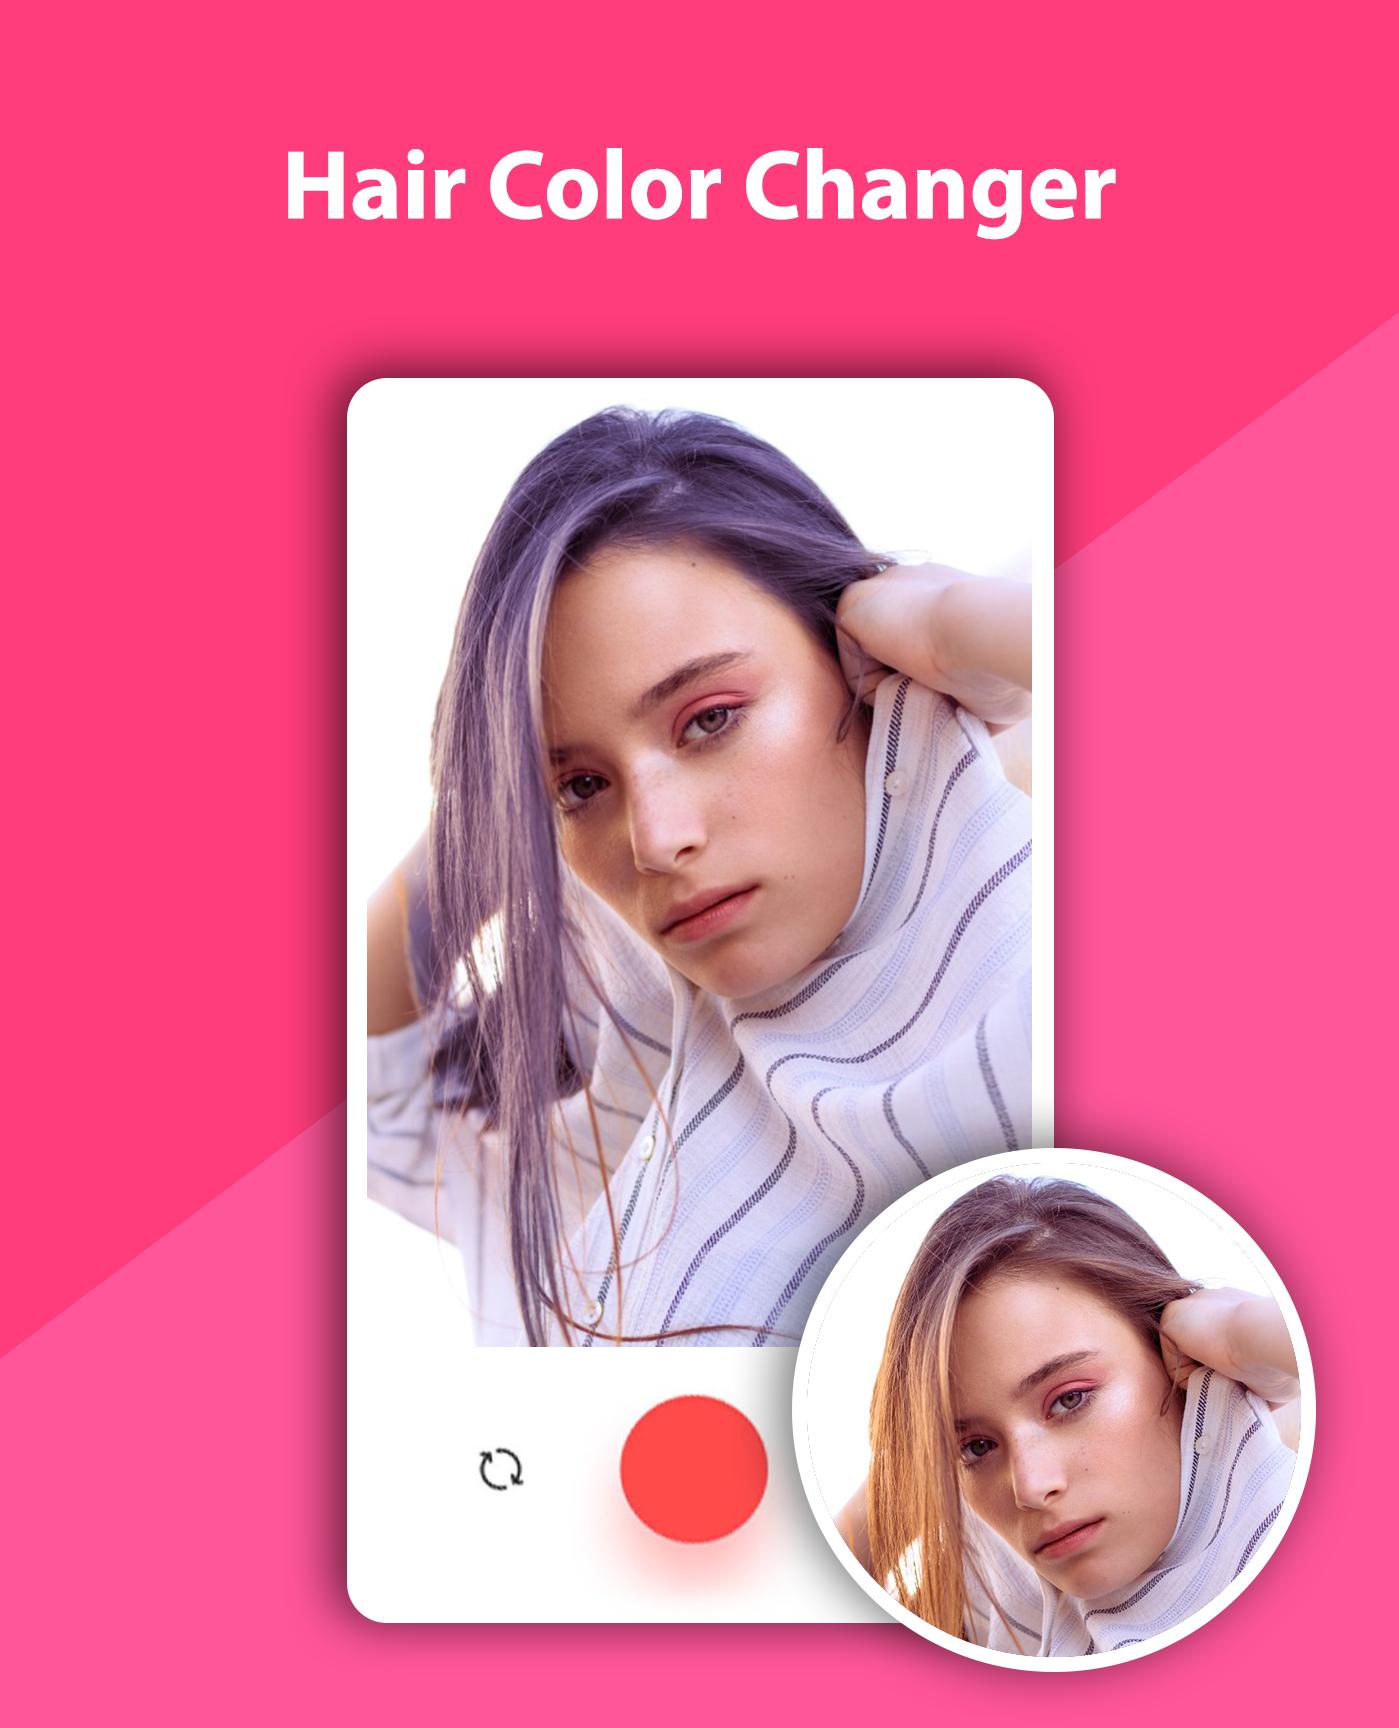 Hair color changer - Try different hair colors 1.0.0 Screenshot 5